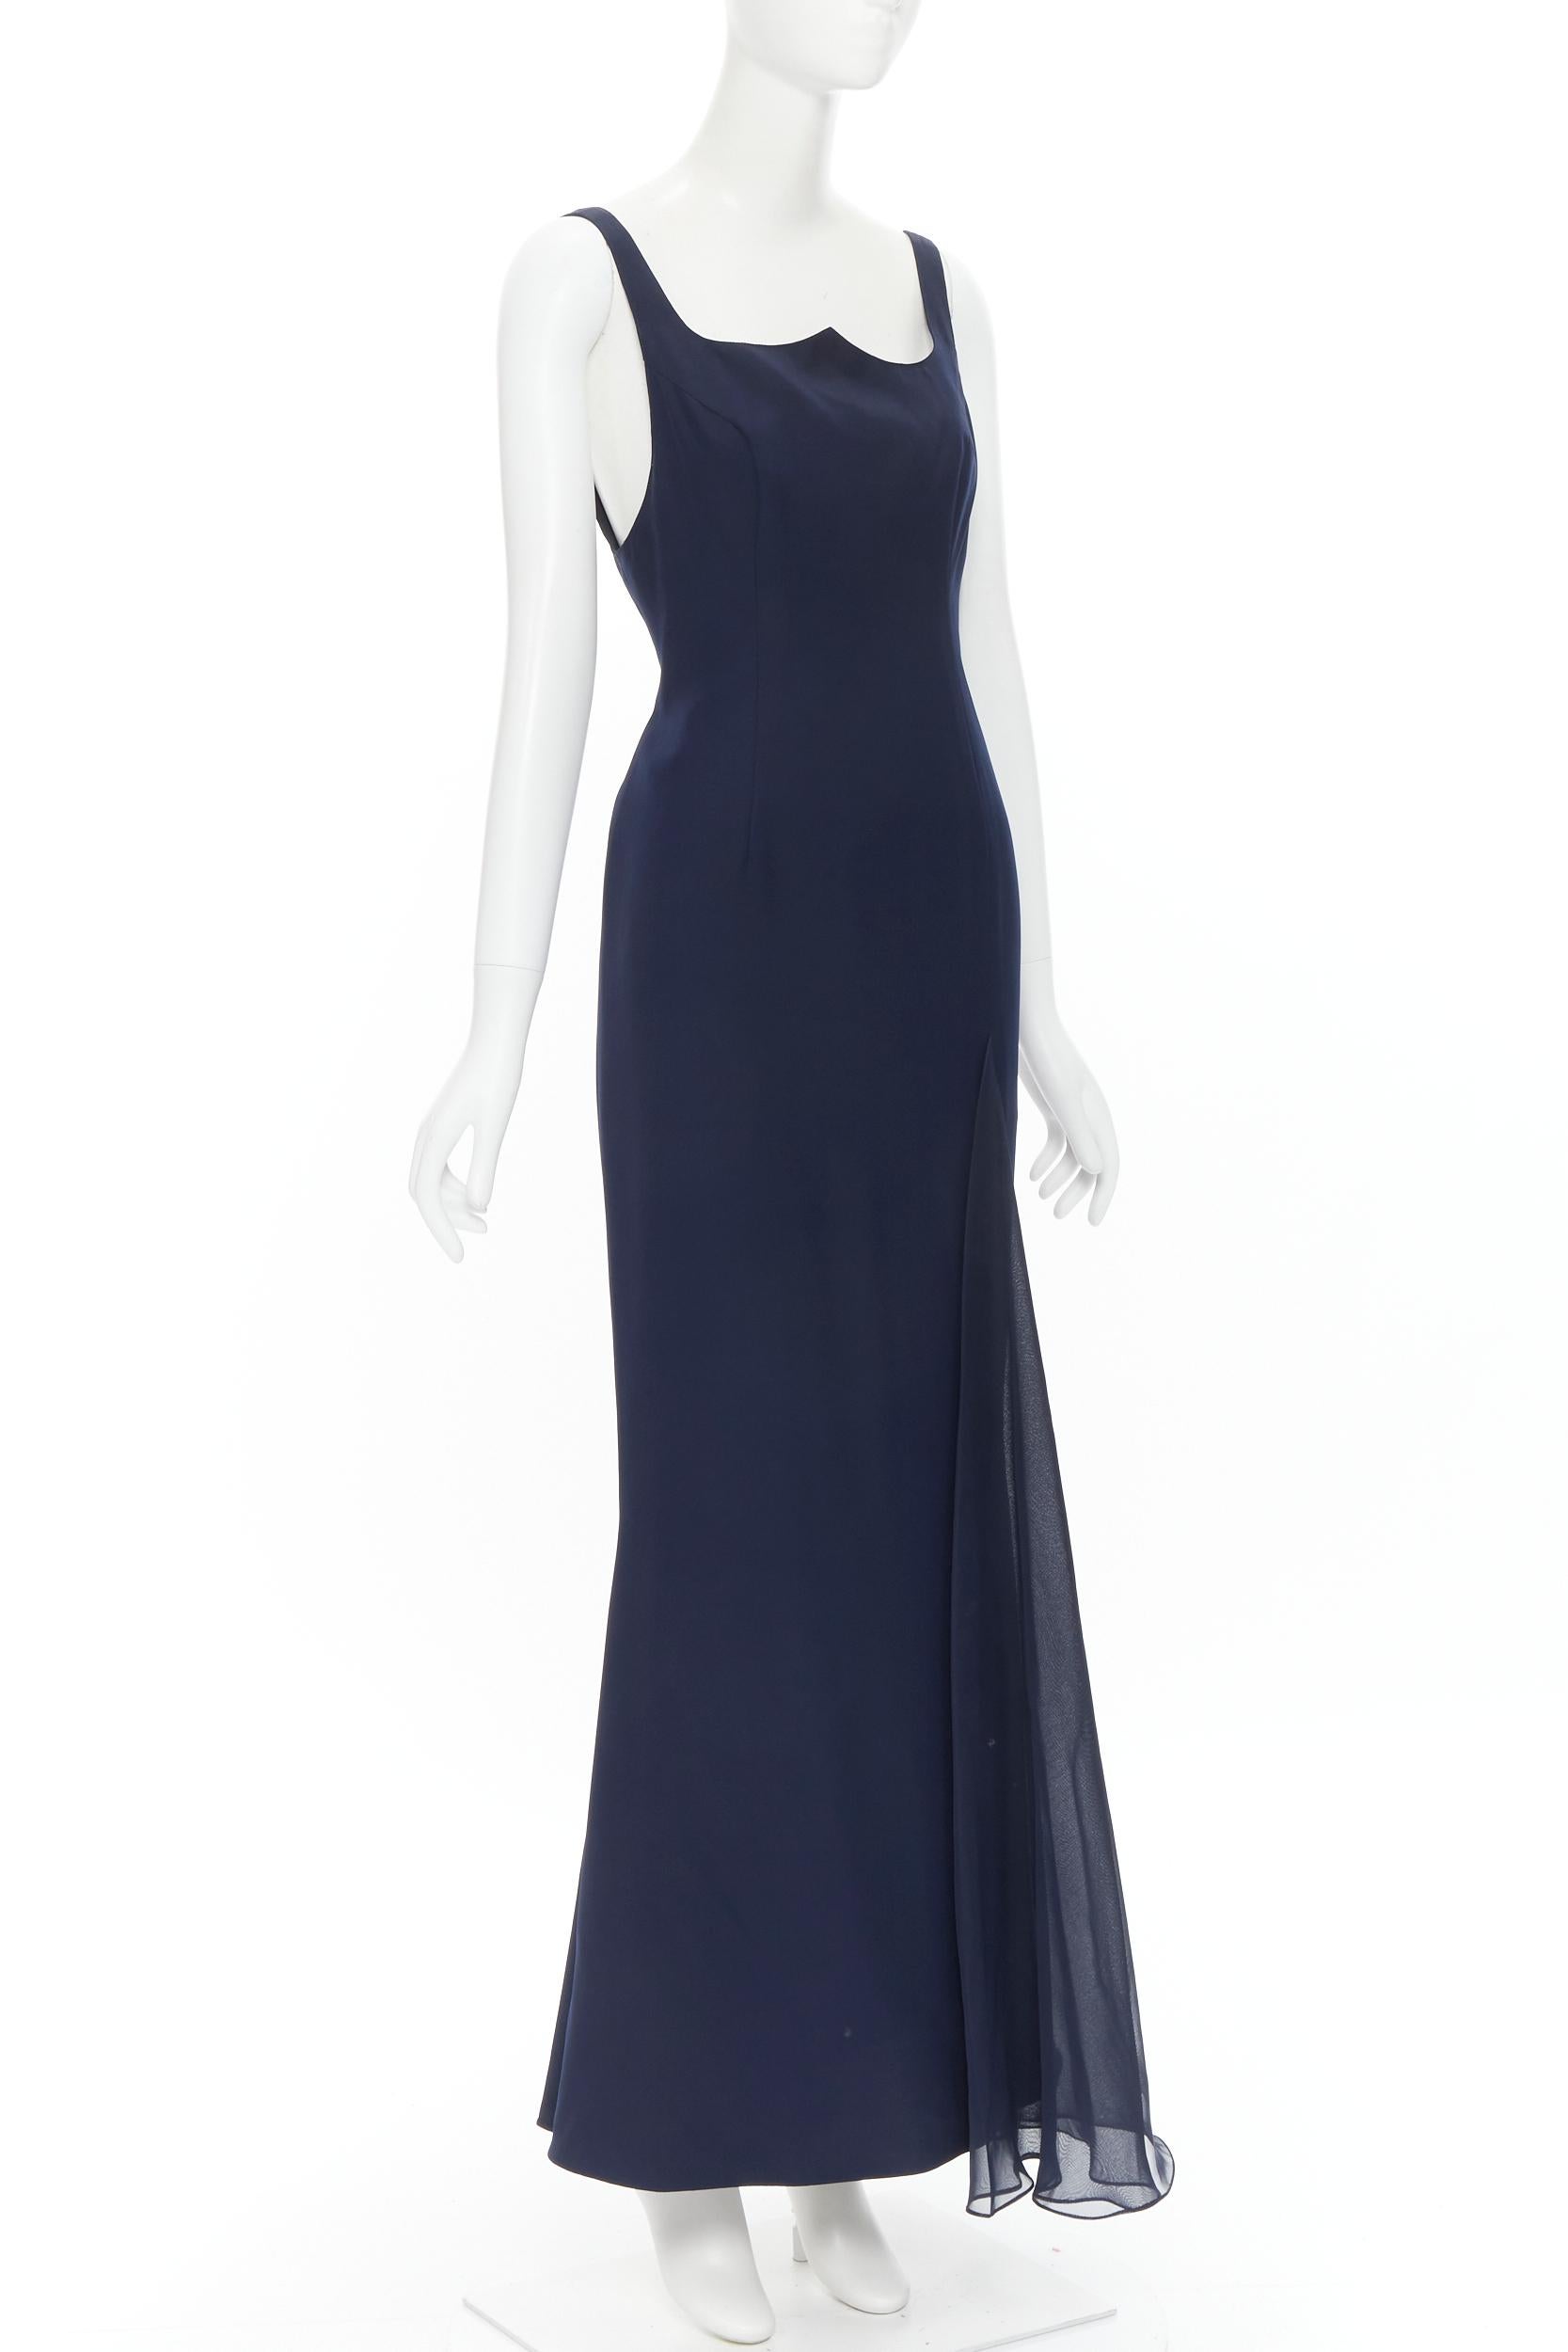 vintage GIANNI VERSACE 1995 sweetheart neckline navy chiffon insert gown IT42 M Reference: TGAS/B01448 
Brand: Gianni Versace 
Designer: Gianni Versace 
Collection: 1995 
Material: Wool crepe 
Color: Navy 
Pattern: Solid 
Closure: Zip 
Extra Detail: